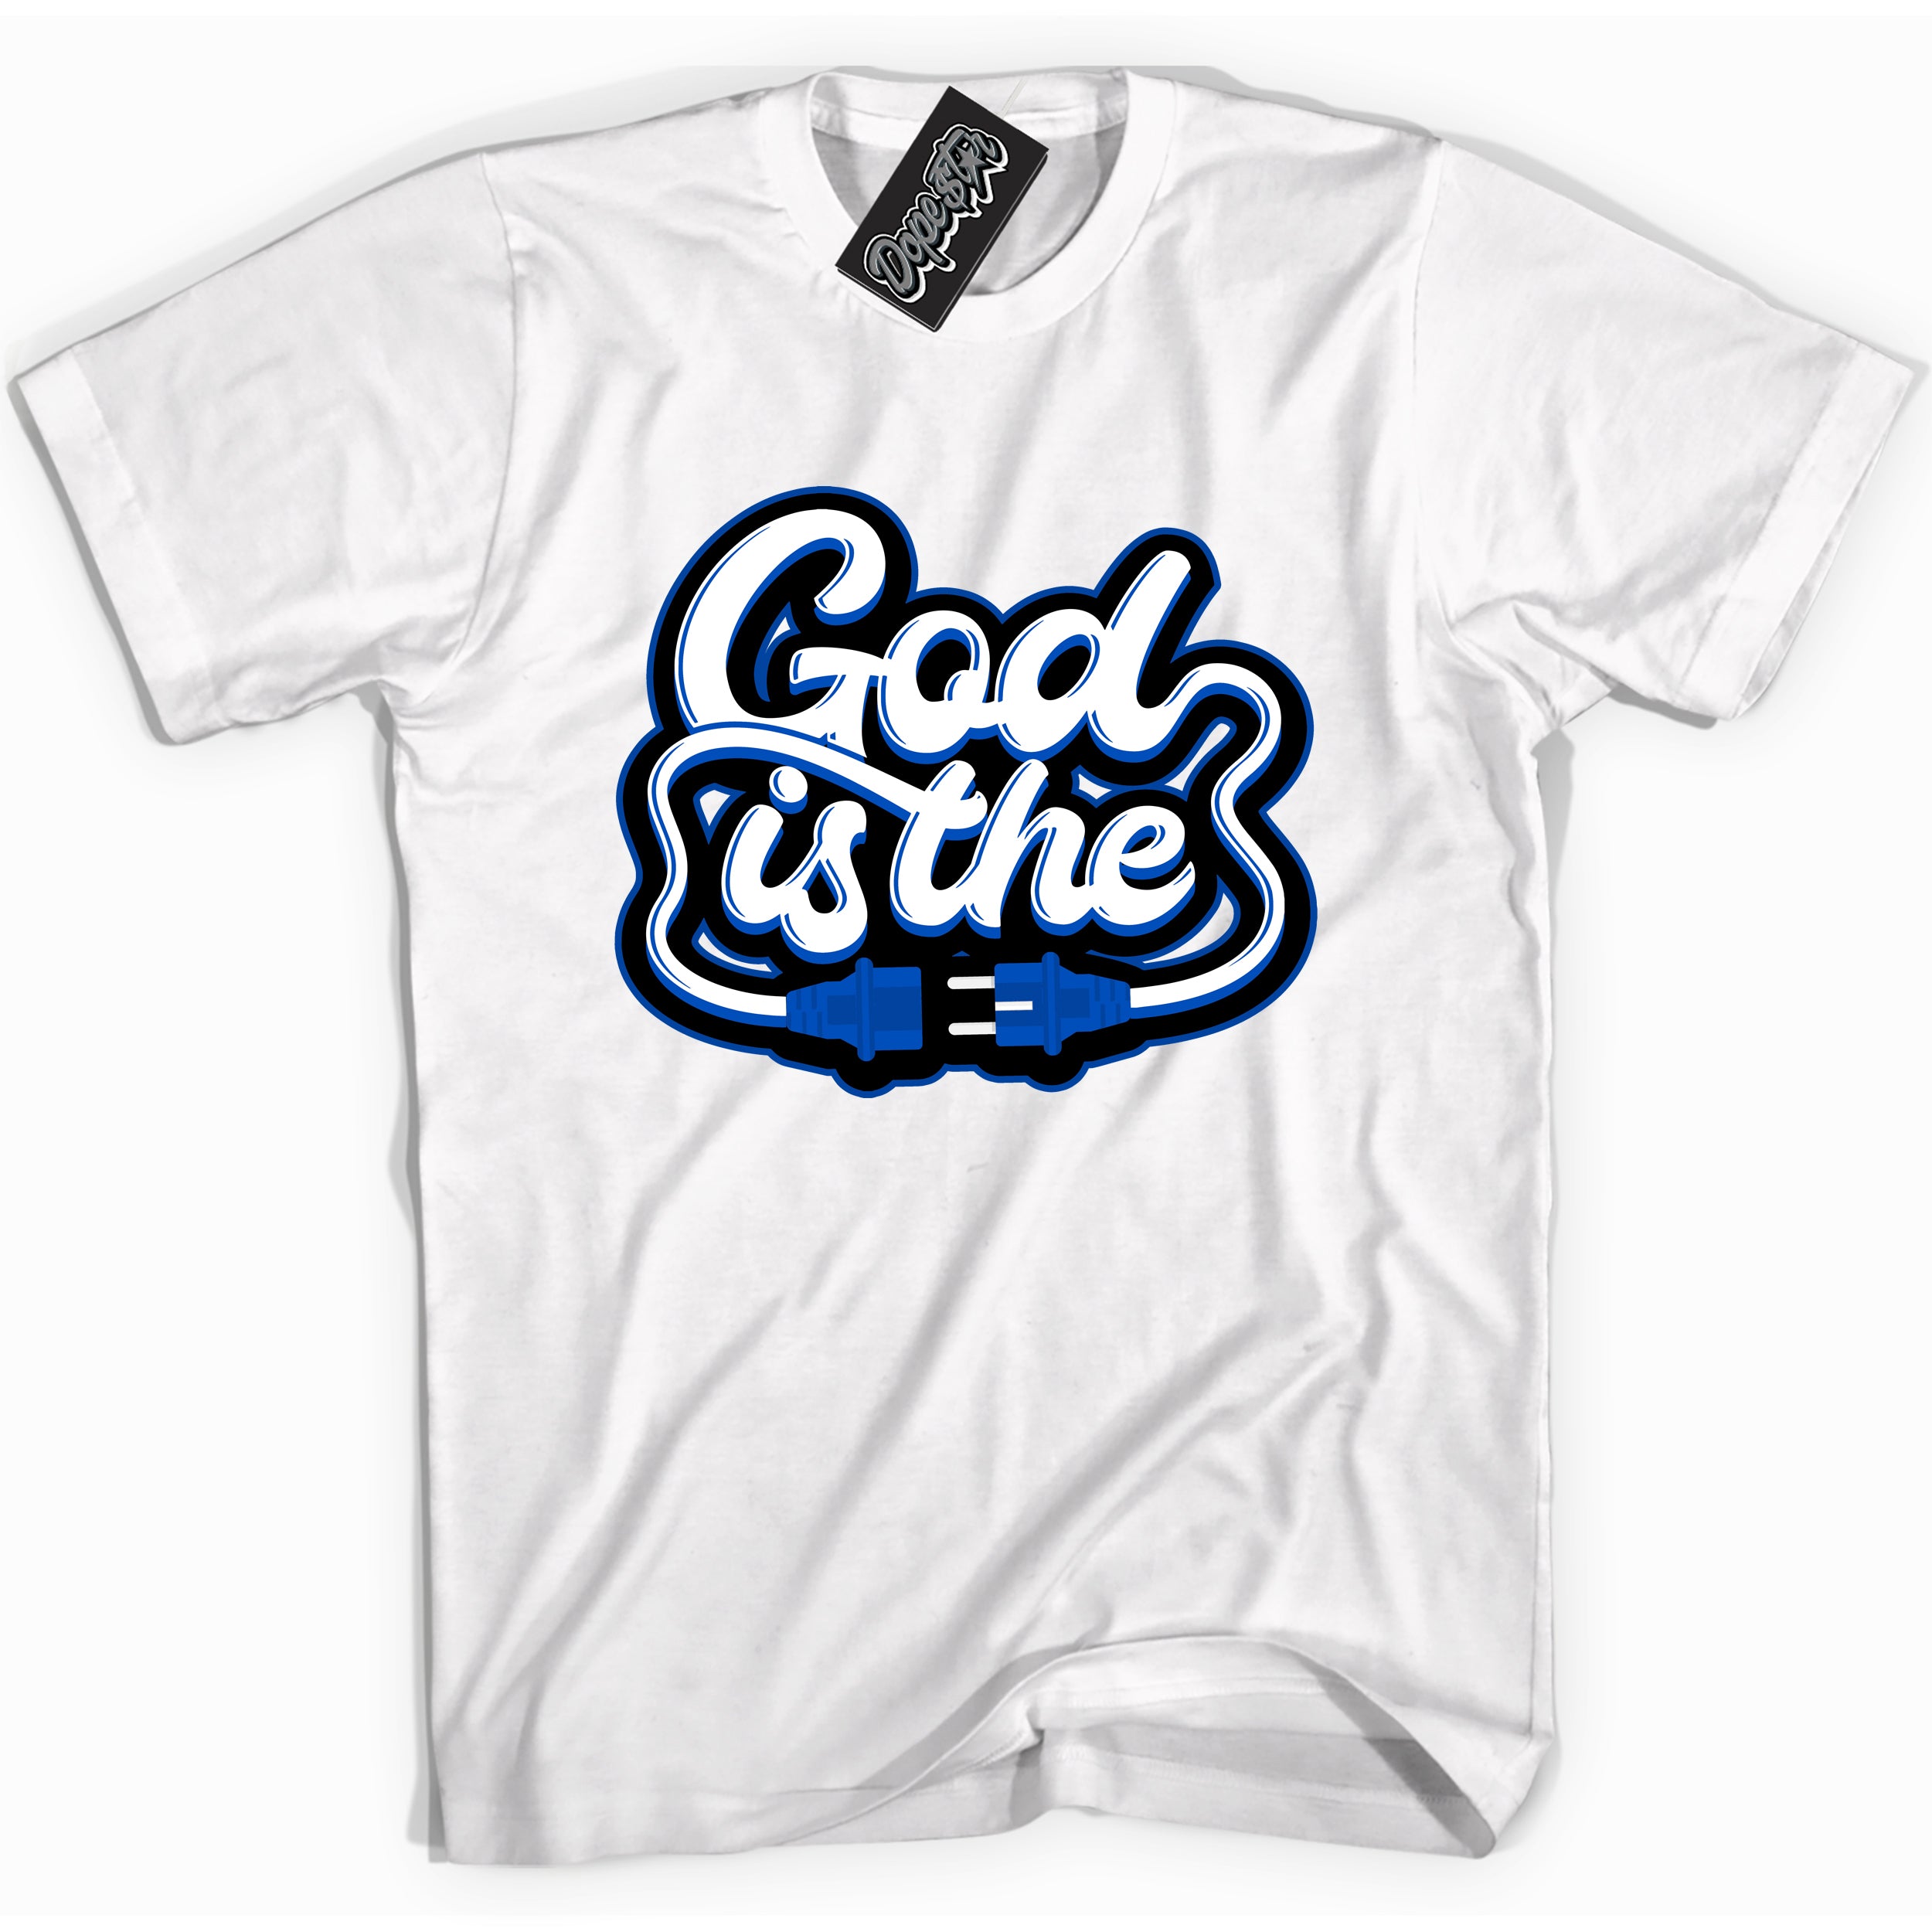 Cool White graphic tee with God Is The print, that perfectly matches OG Royal Reimagined 1s sneakers 